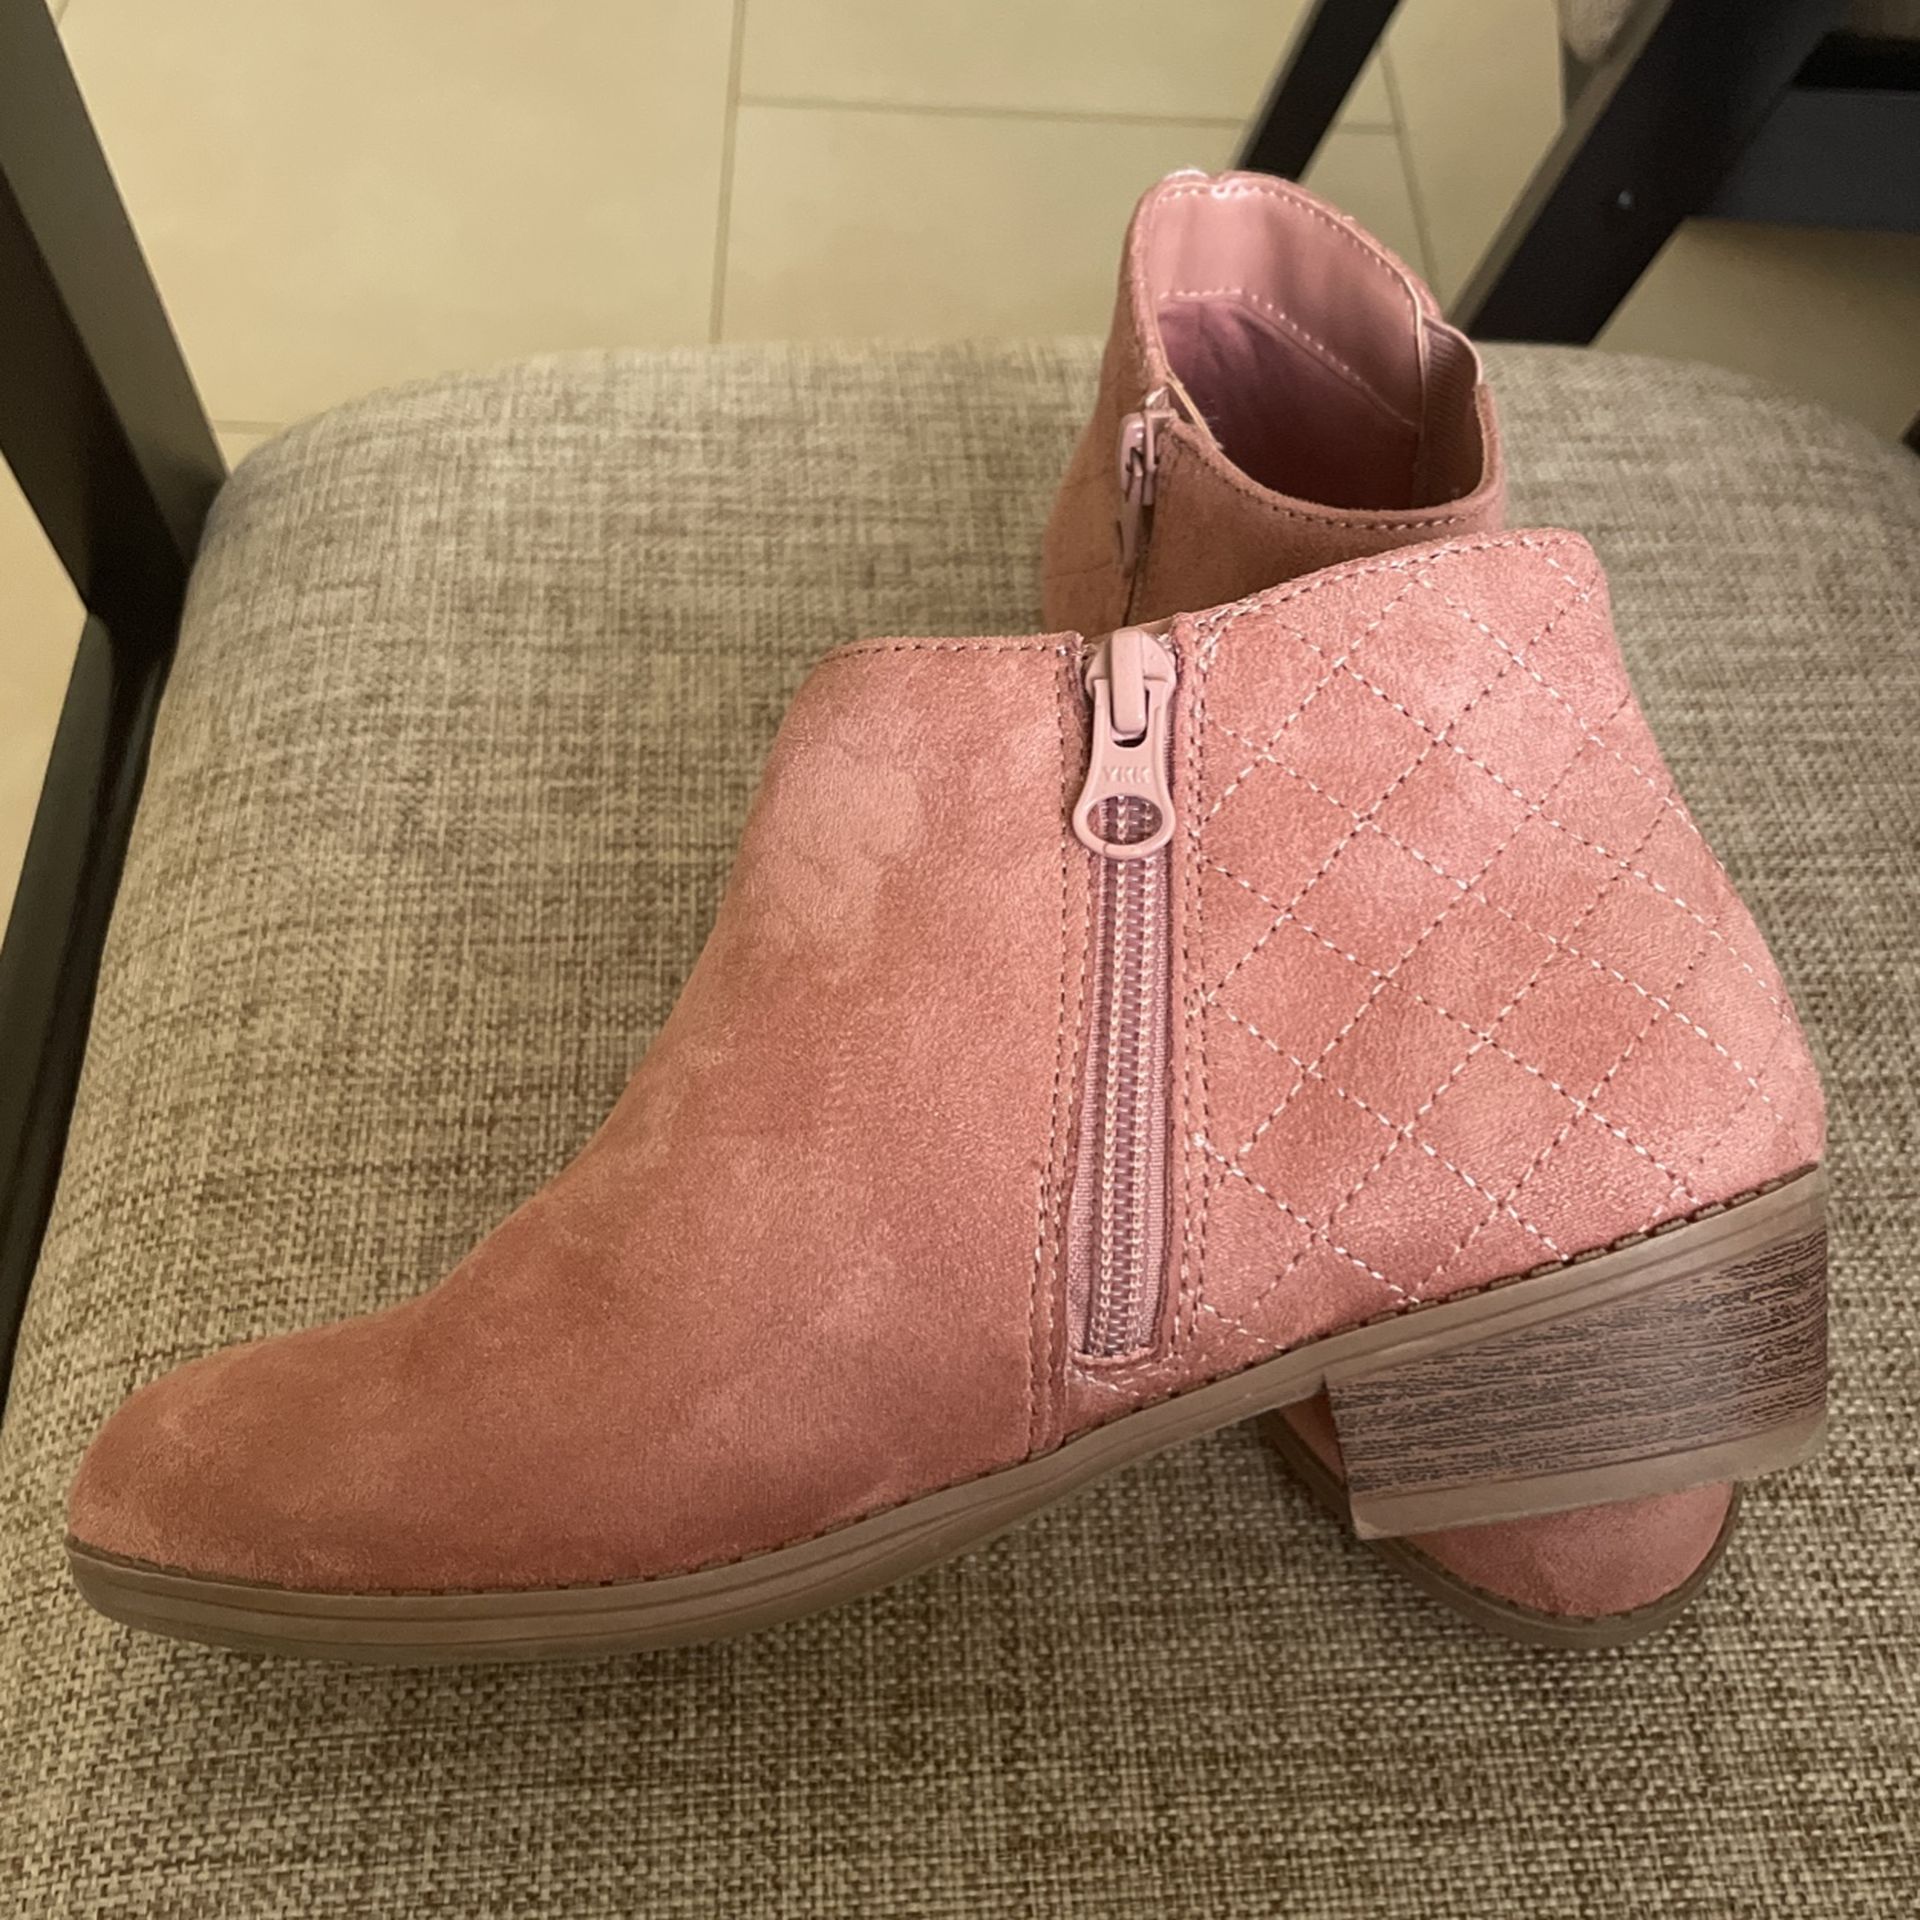 Boots Sz3 NEW Girls Pink ankle